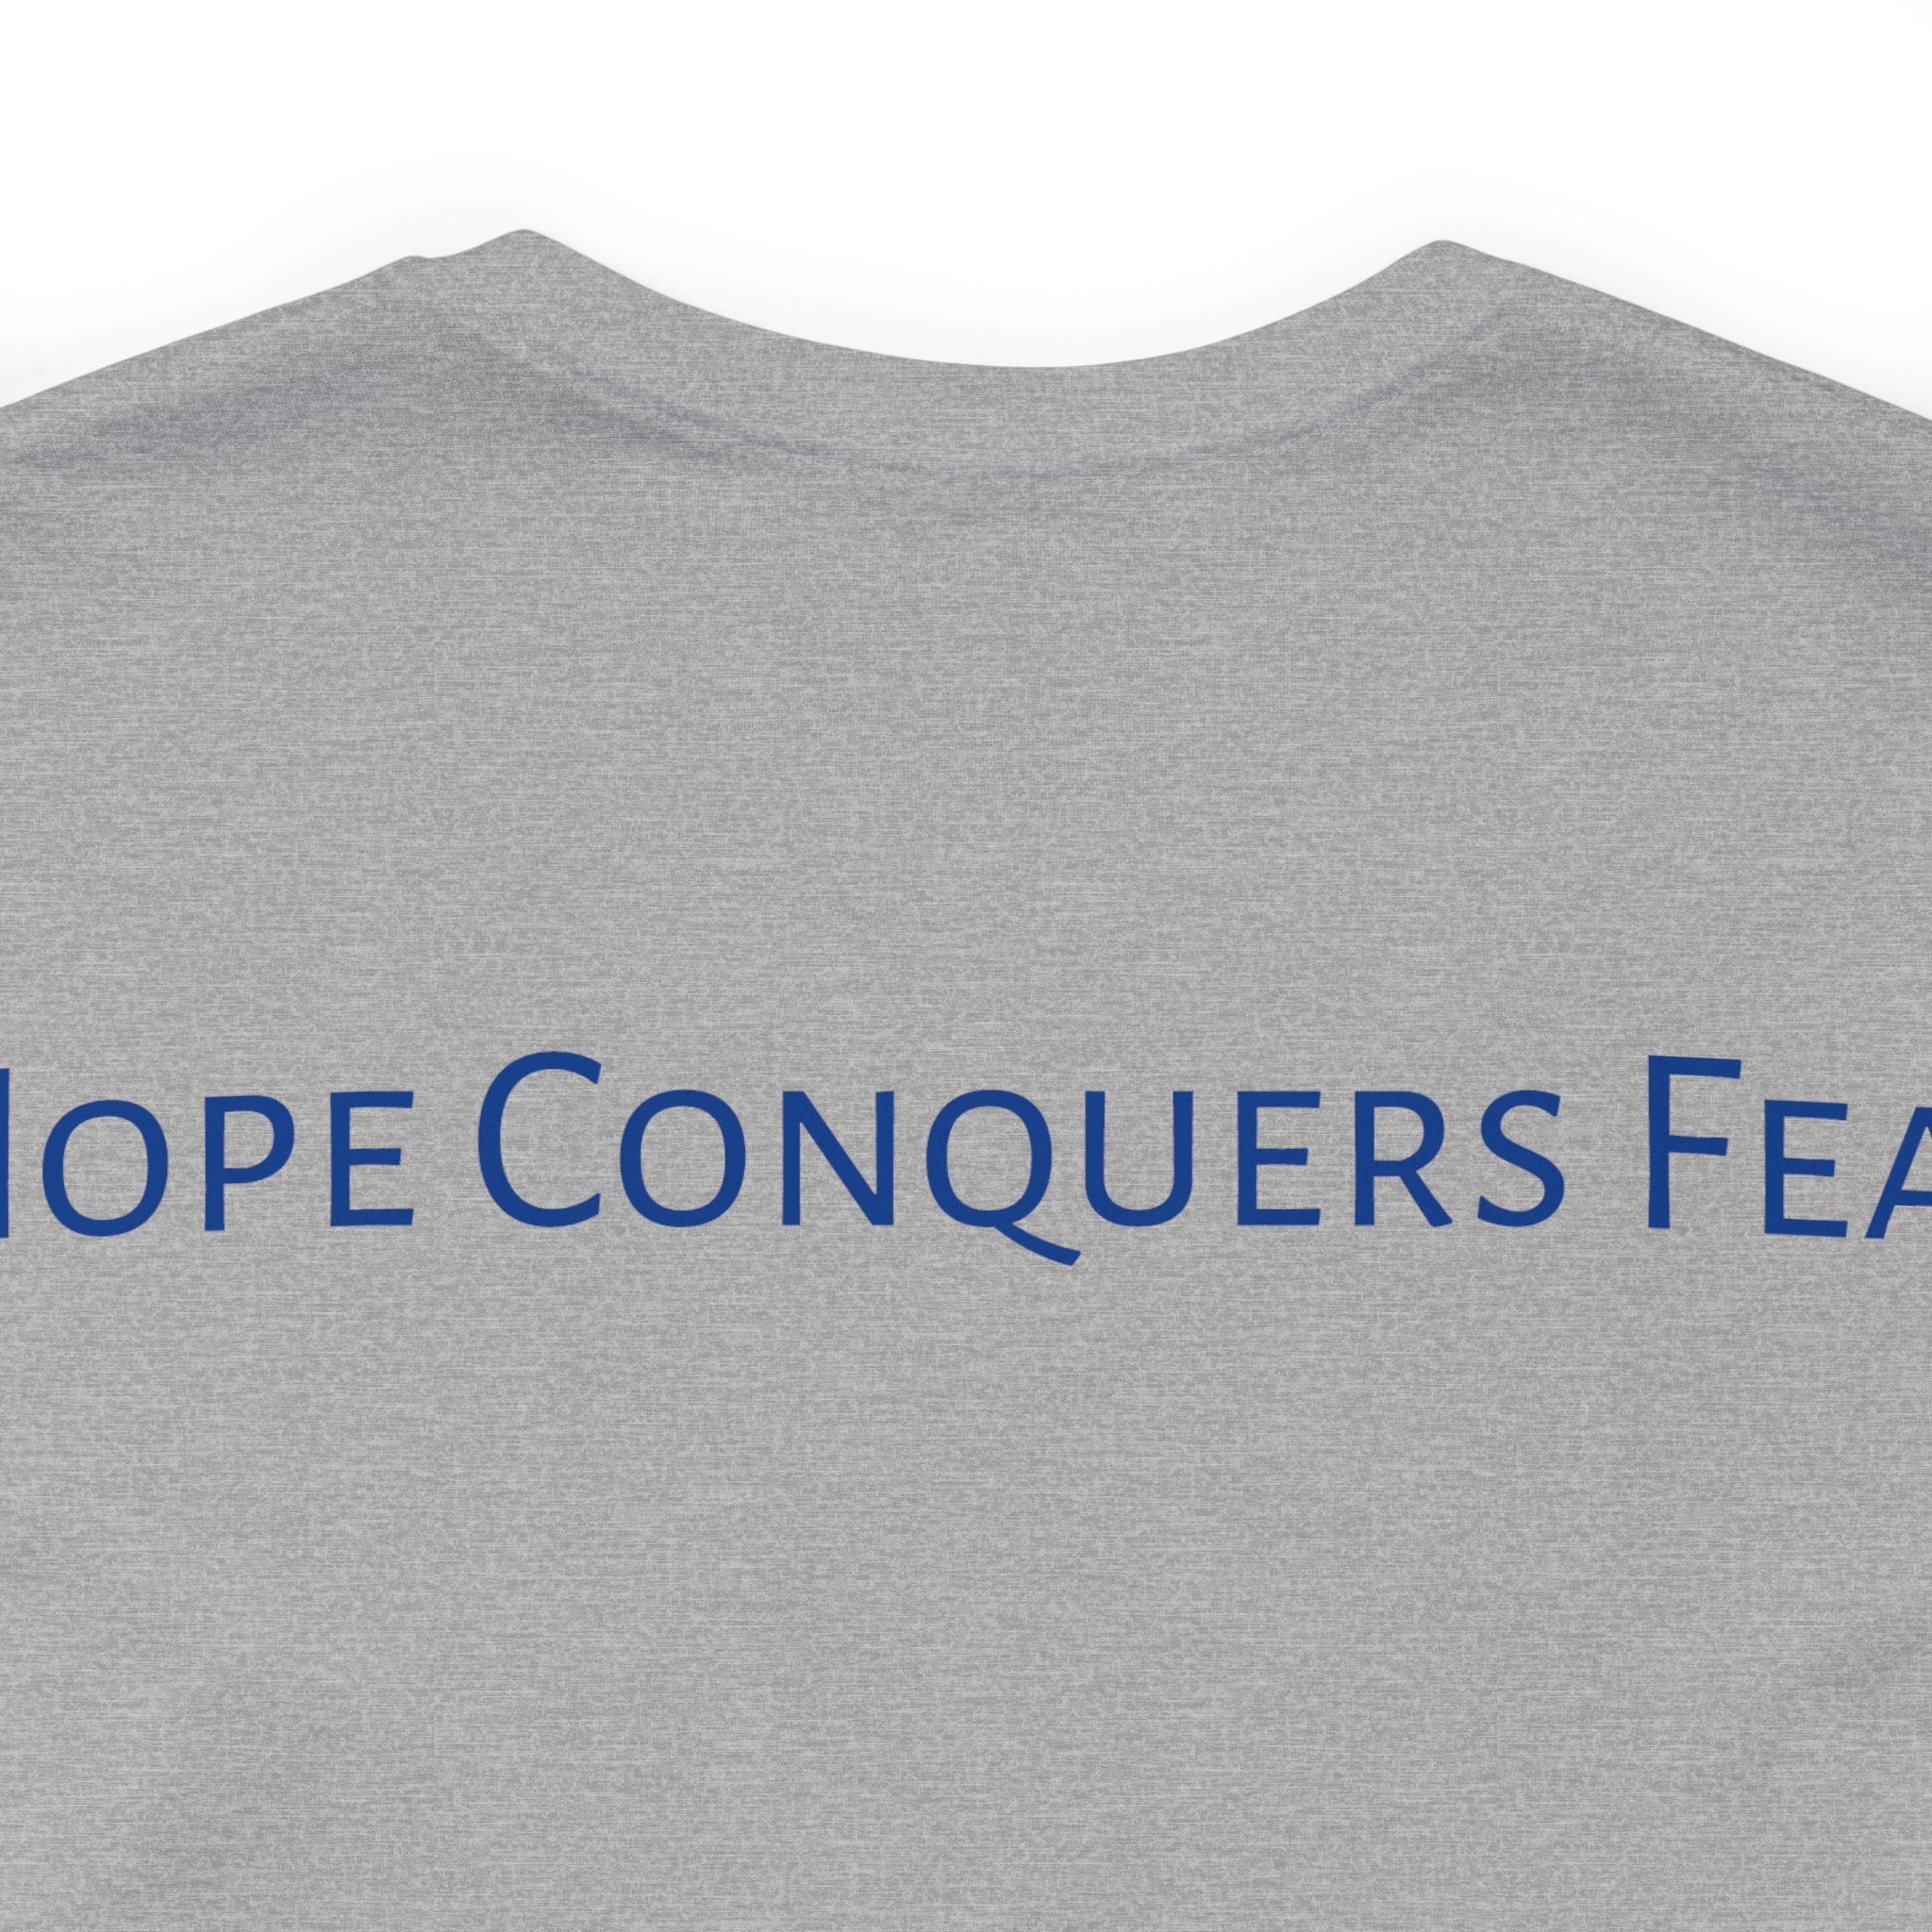 Hope Conquers Fear Jersey Tee - Bella+Canvas 3001 Heather Ice Blue Airlume Cotton Bella+Canvas 3001 Crew Neckline Jersey Short Sleeve Lightweight Fabric Mental Health Support Retail Fit Tear-away Label Tee Unisex Tee T-Shirt 16666063287237312759_2048 Printify